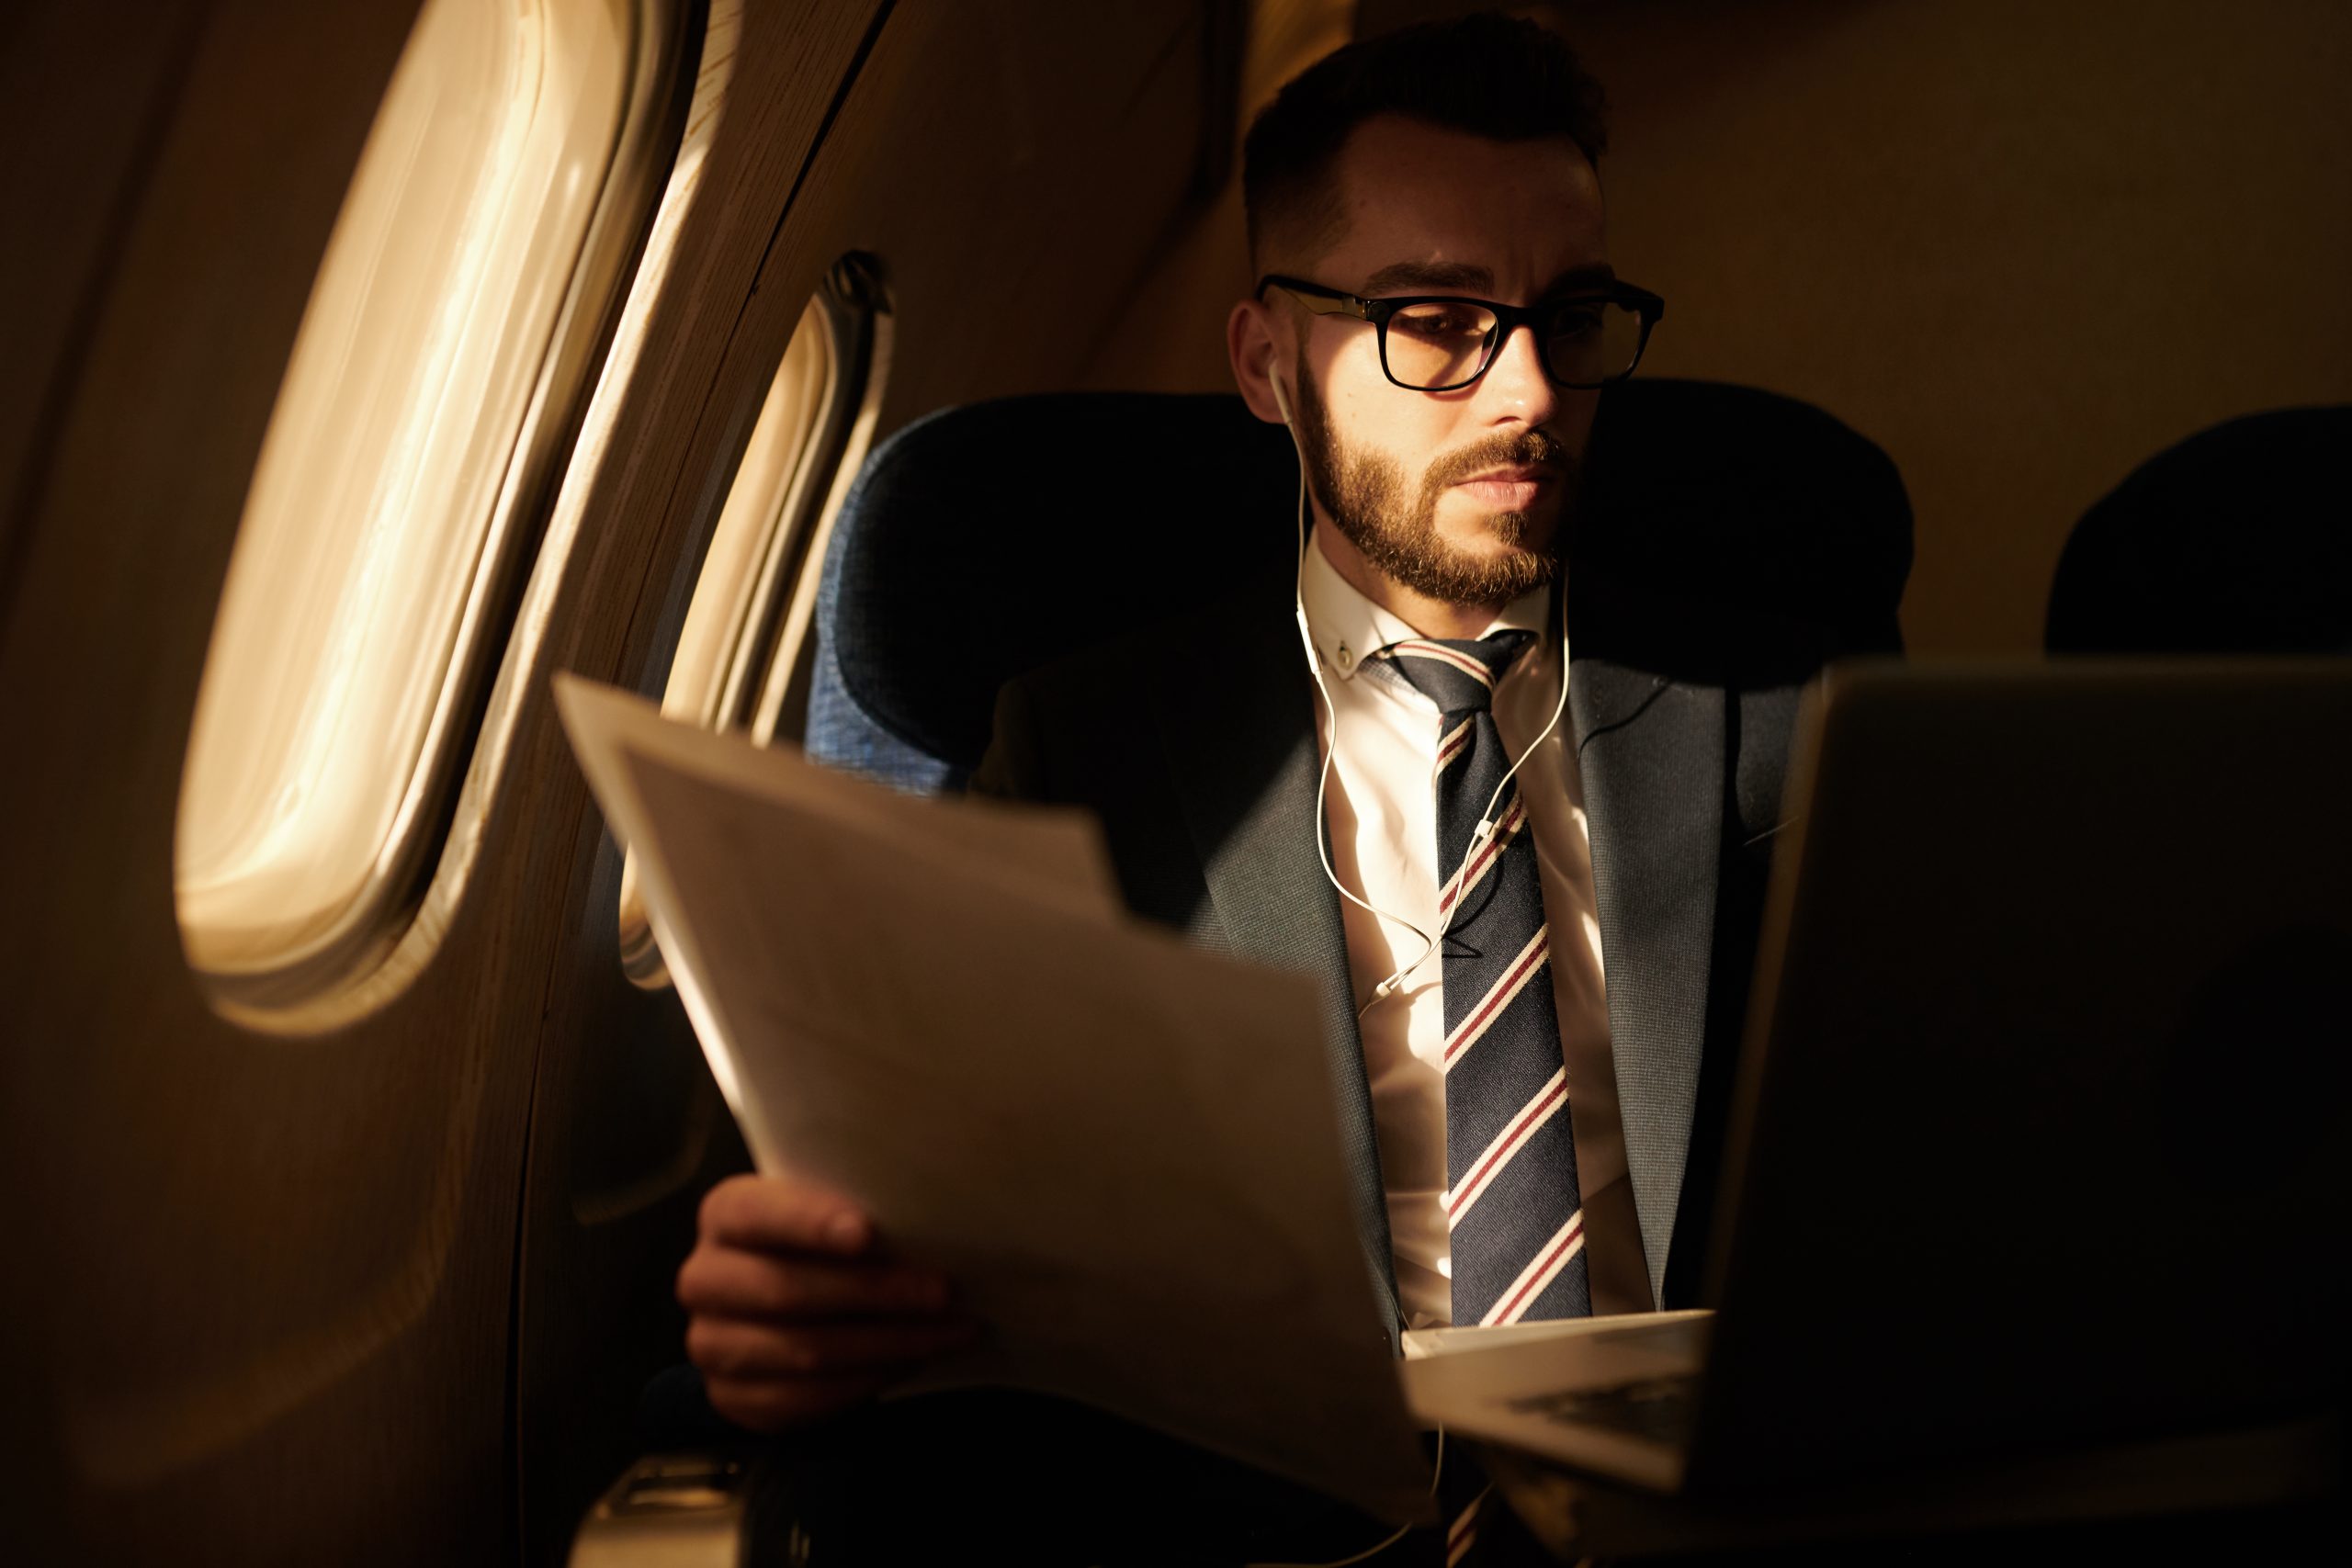 Portrait of successful young businessman working in dim plane while enjoying first class flight, copy space